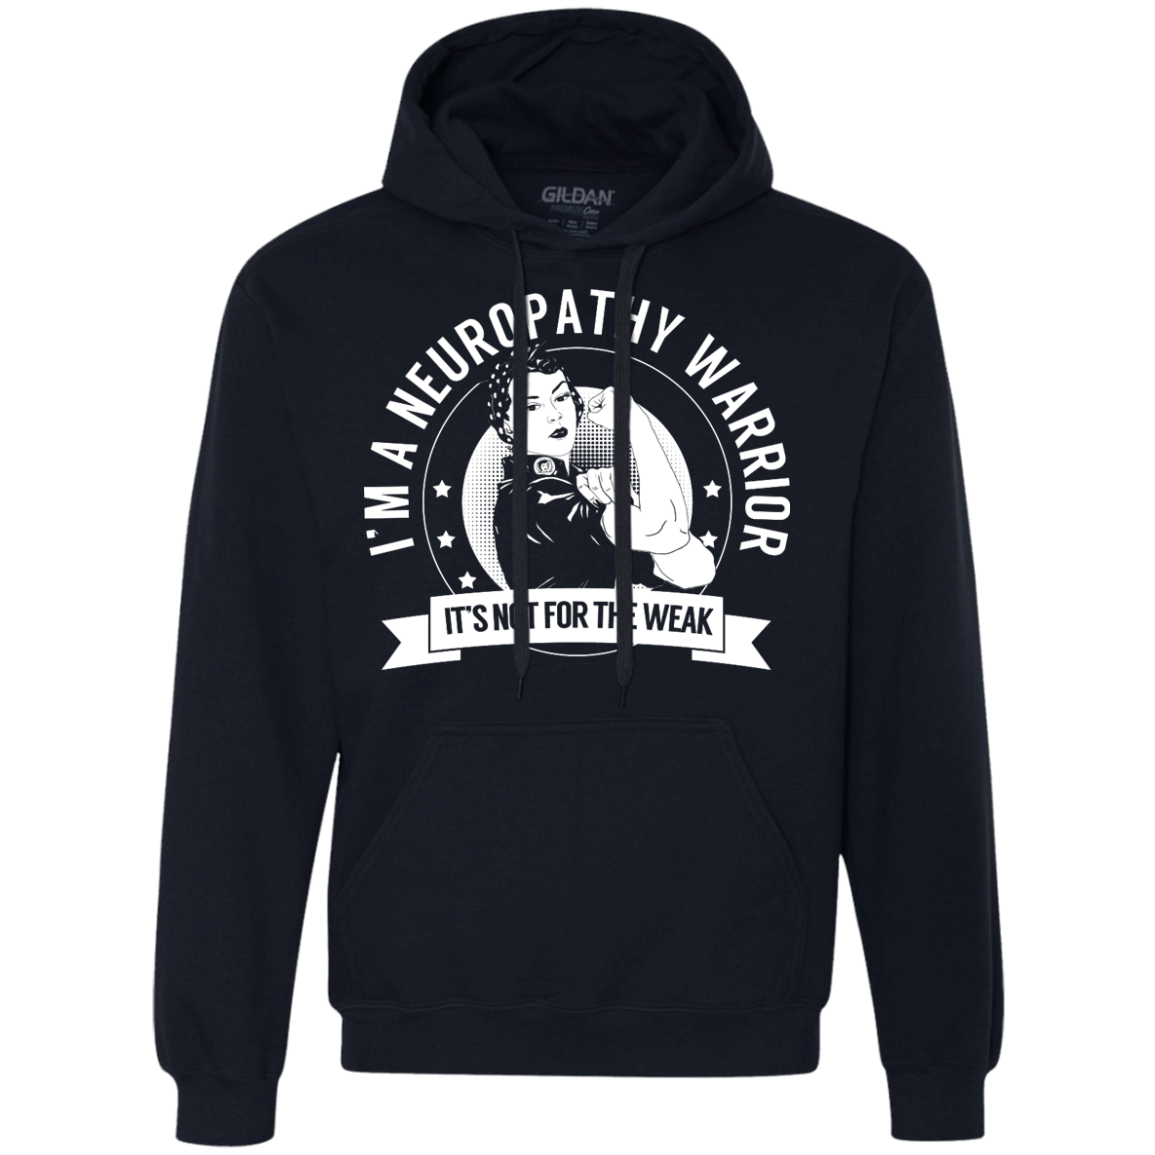 Neuropathy Warrior Not For The Weak Pullover Hoodie - The Unchargeables